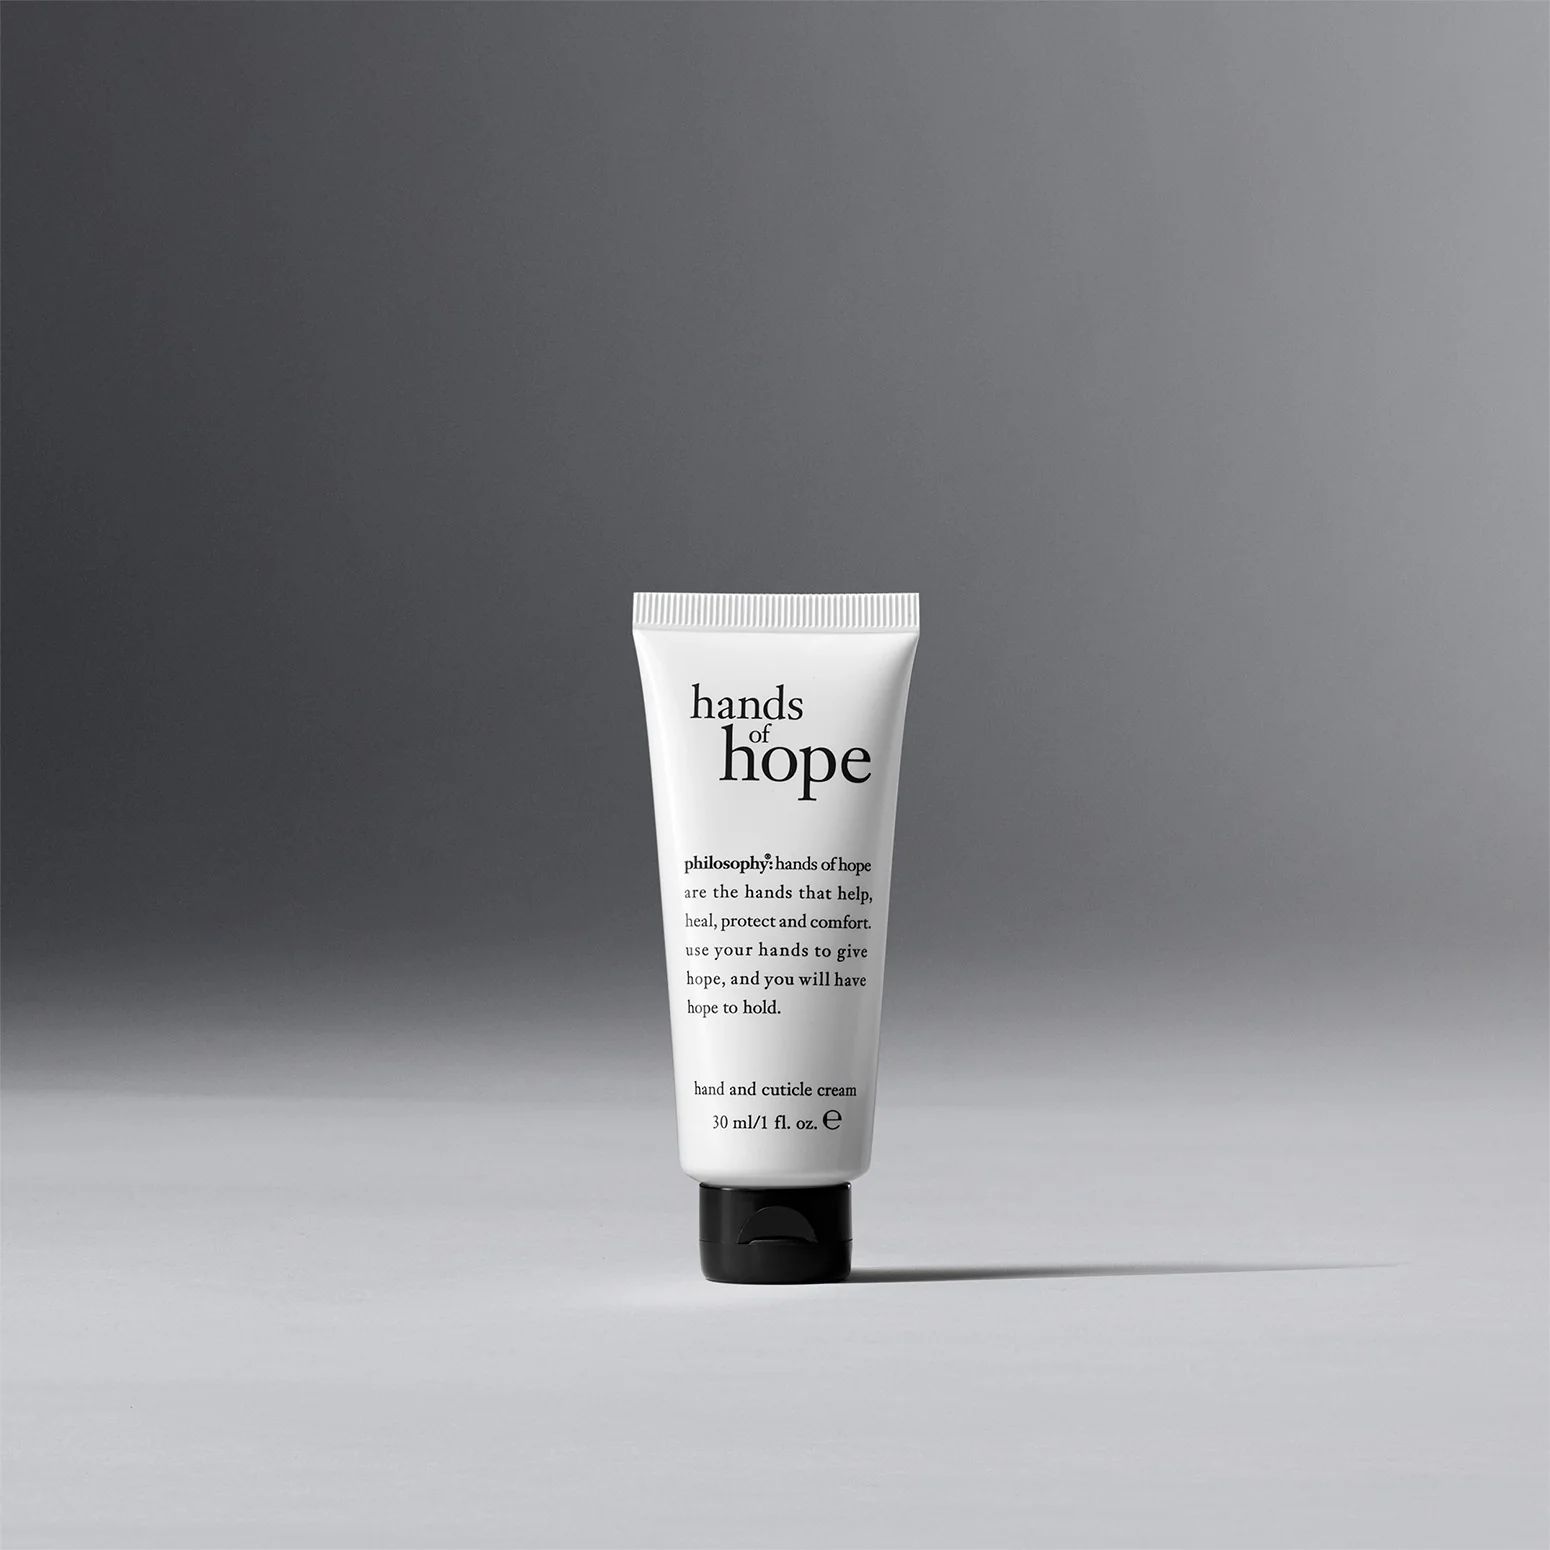 hand and cuticle cream | Philosophy